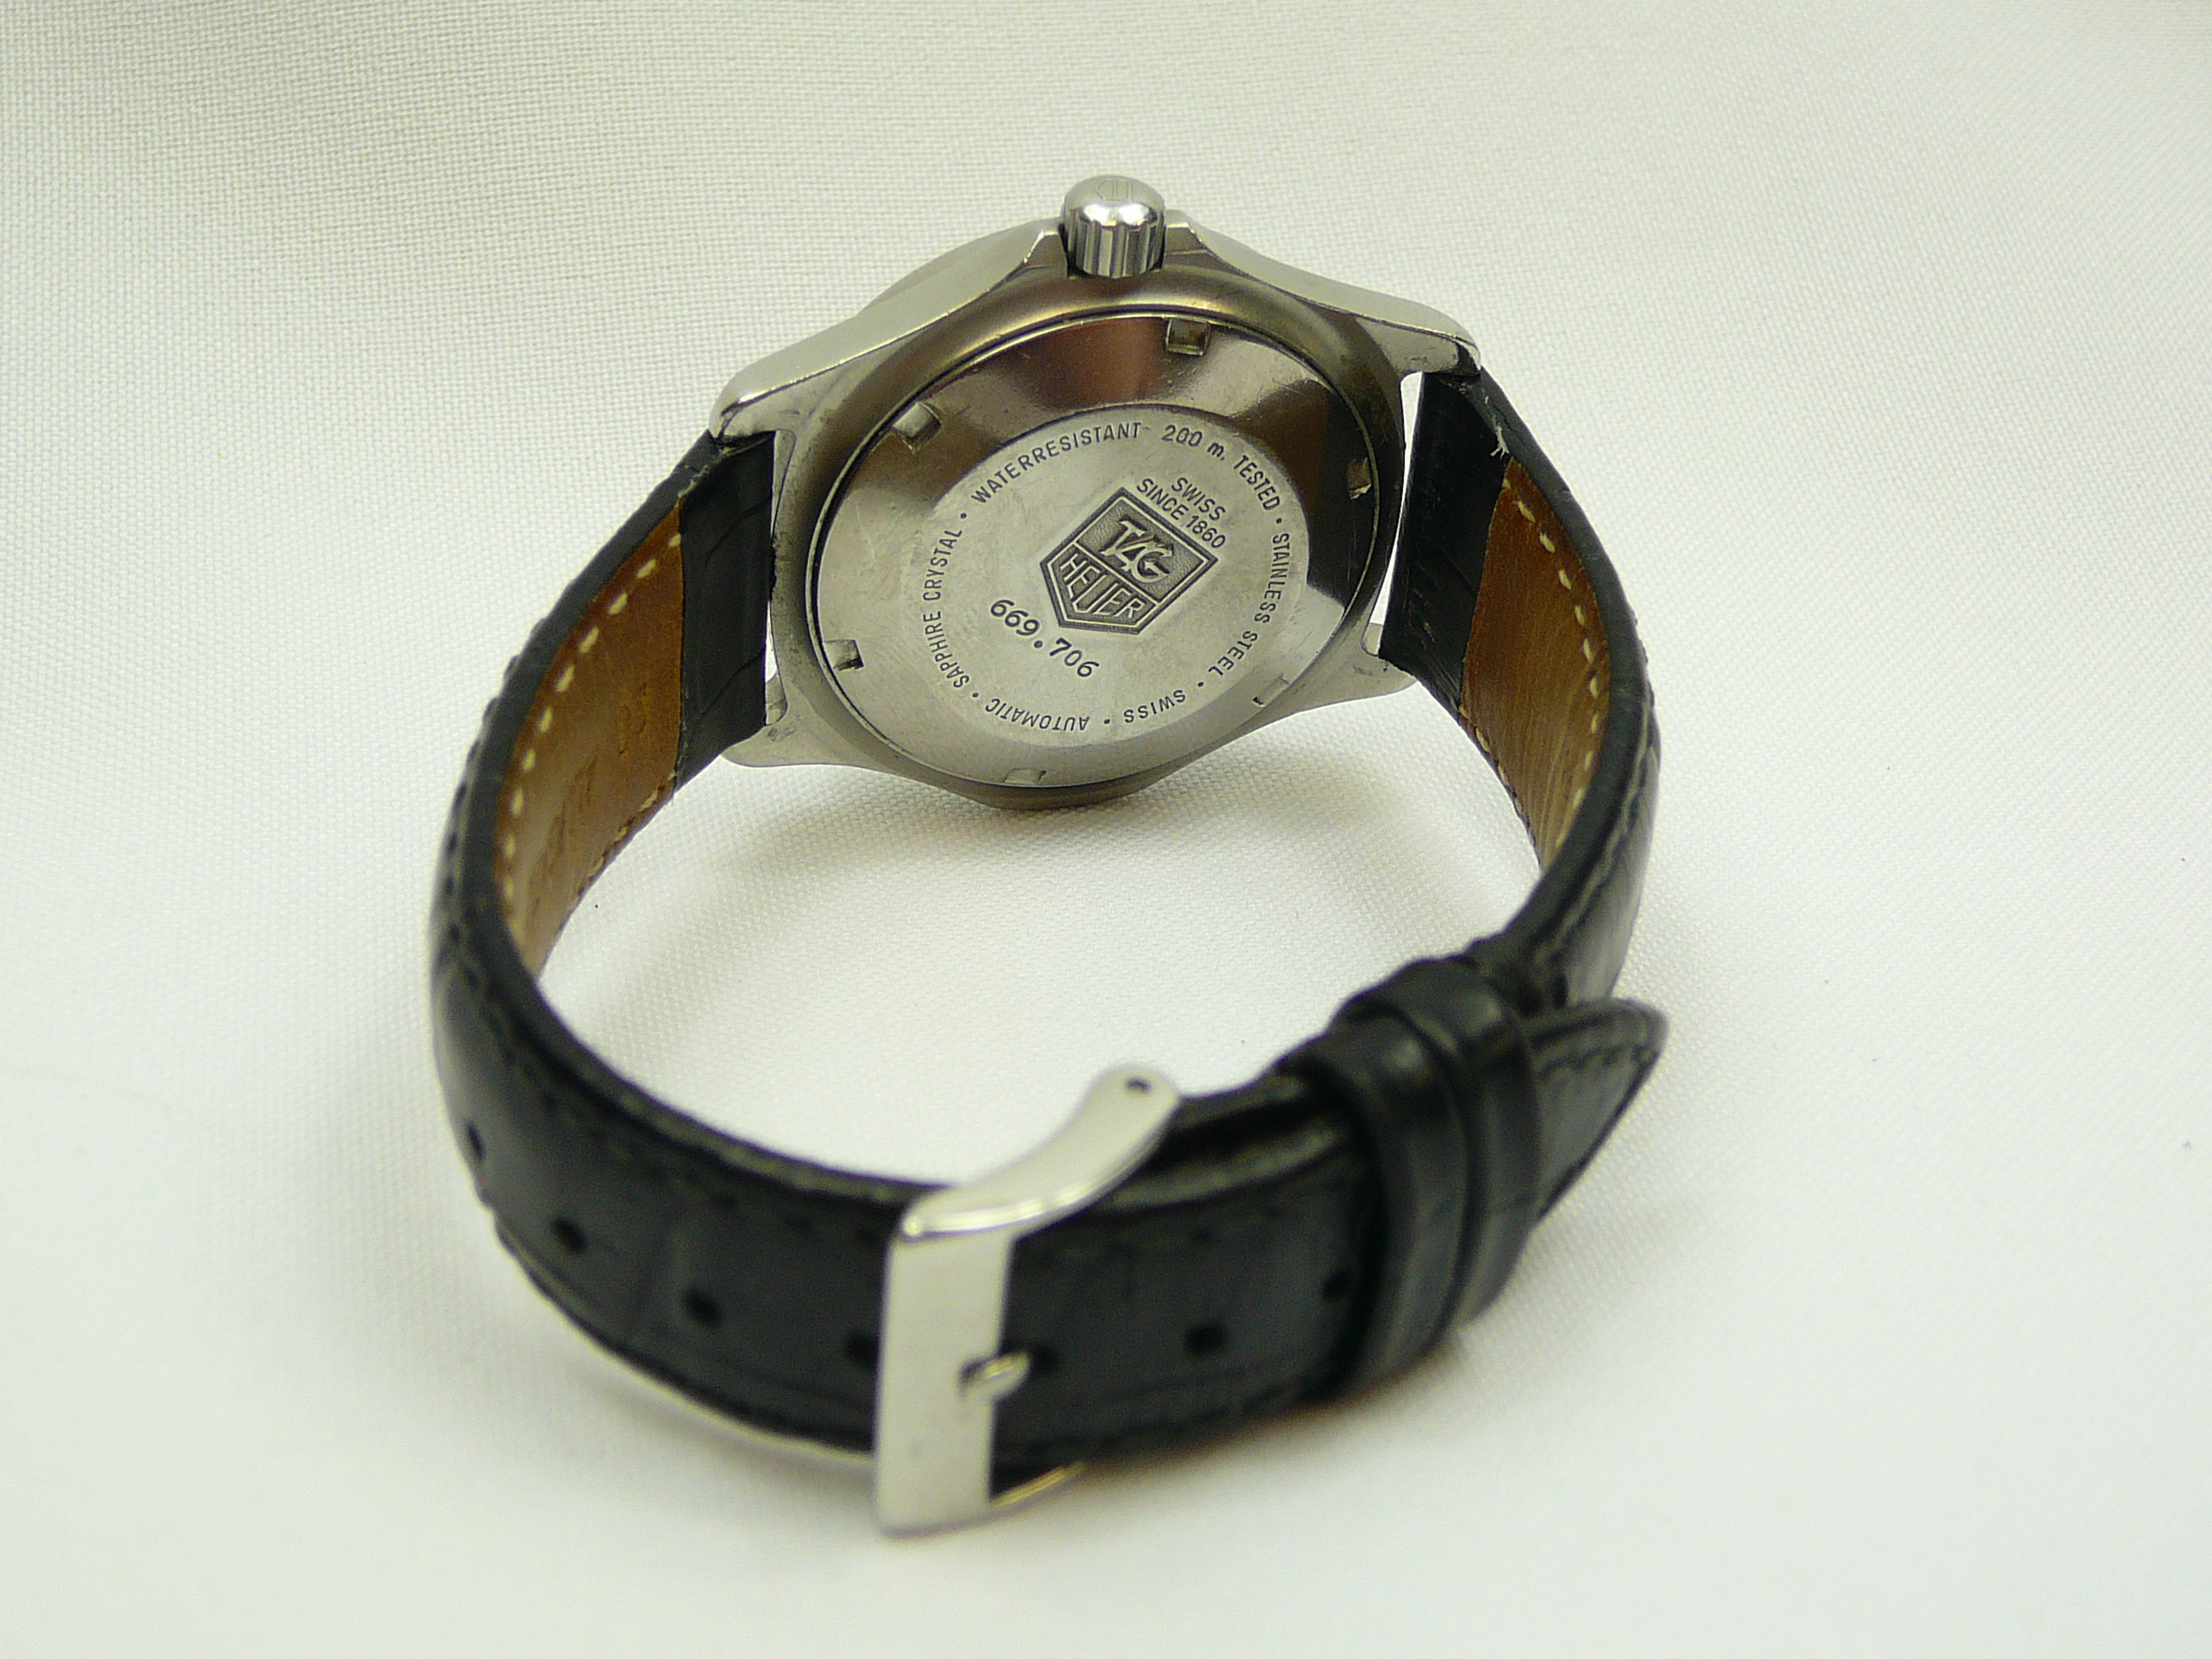 Gents Tag Heuer Wrist Watch - Image 3 of 3